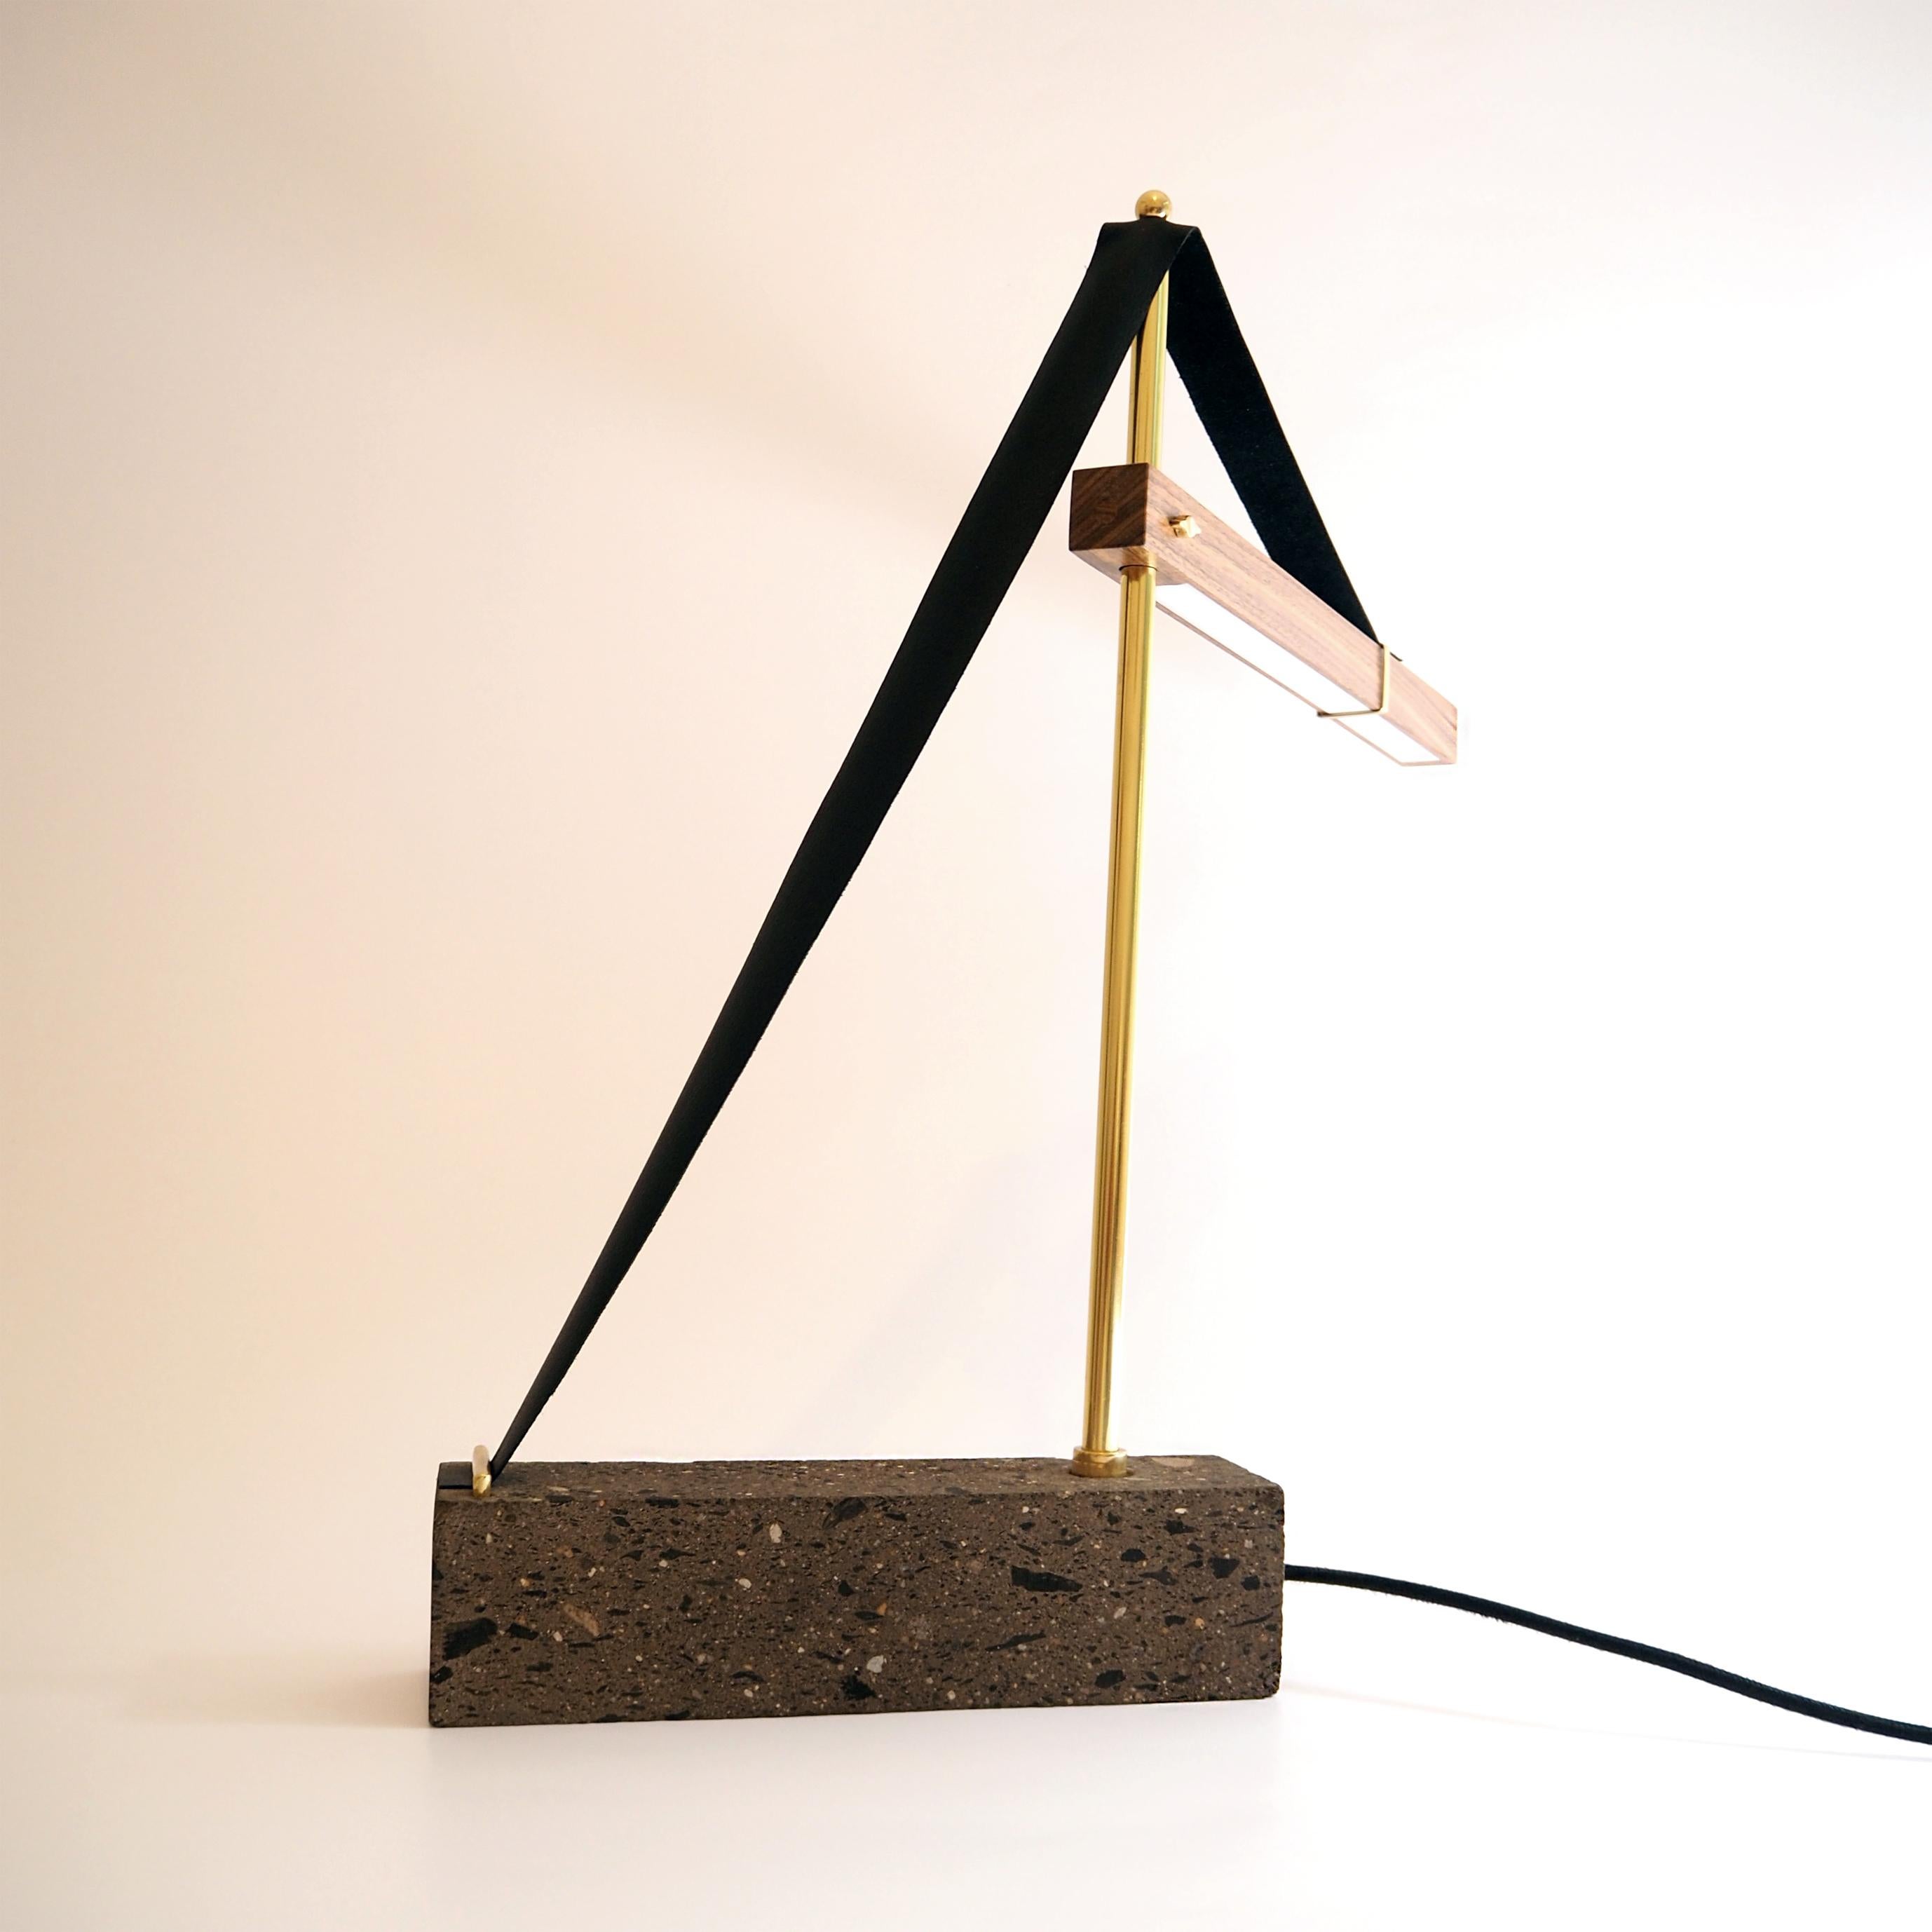 Mexican Grua Lamp by Nomade Atelier